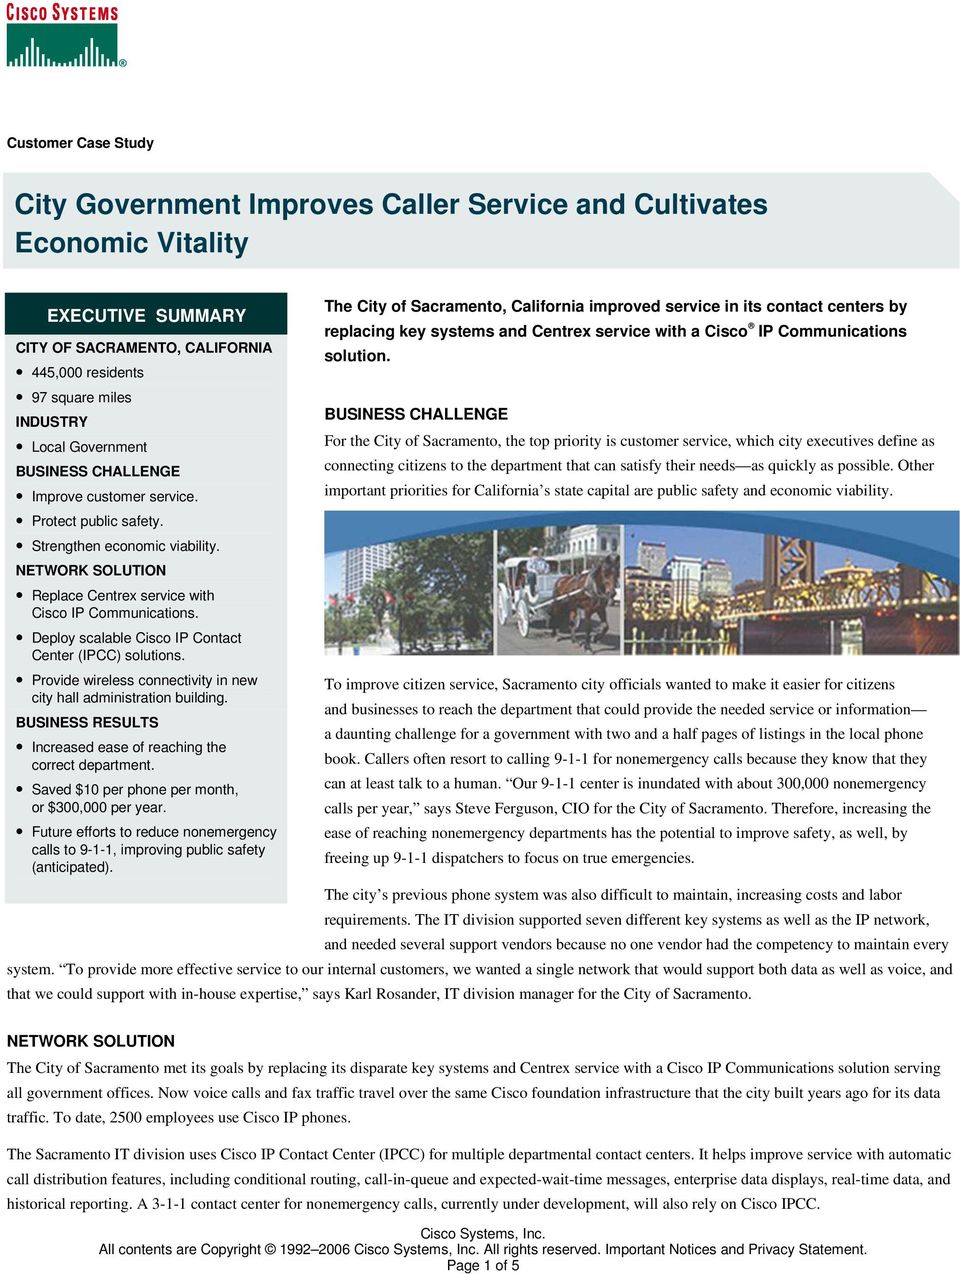 Deploy scalable Cisco IP Contact Center (IPCC) solutions. Provide wireless connectivity in new city hall administration building. BUSINESS RESULTS Increased ease of reaching the correct department.